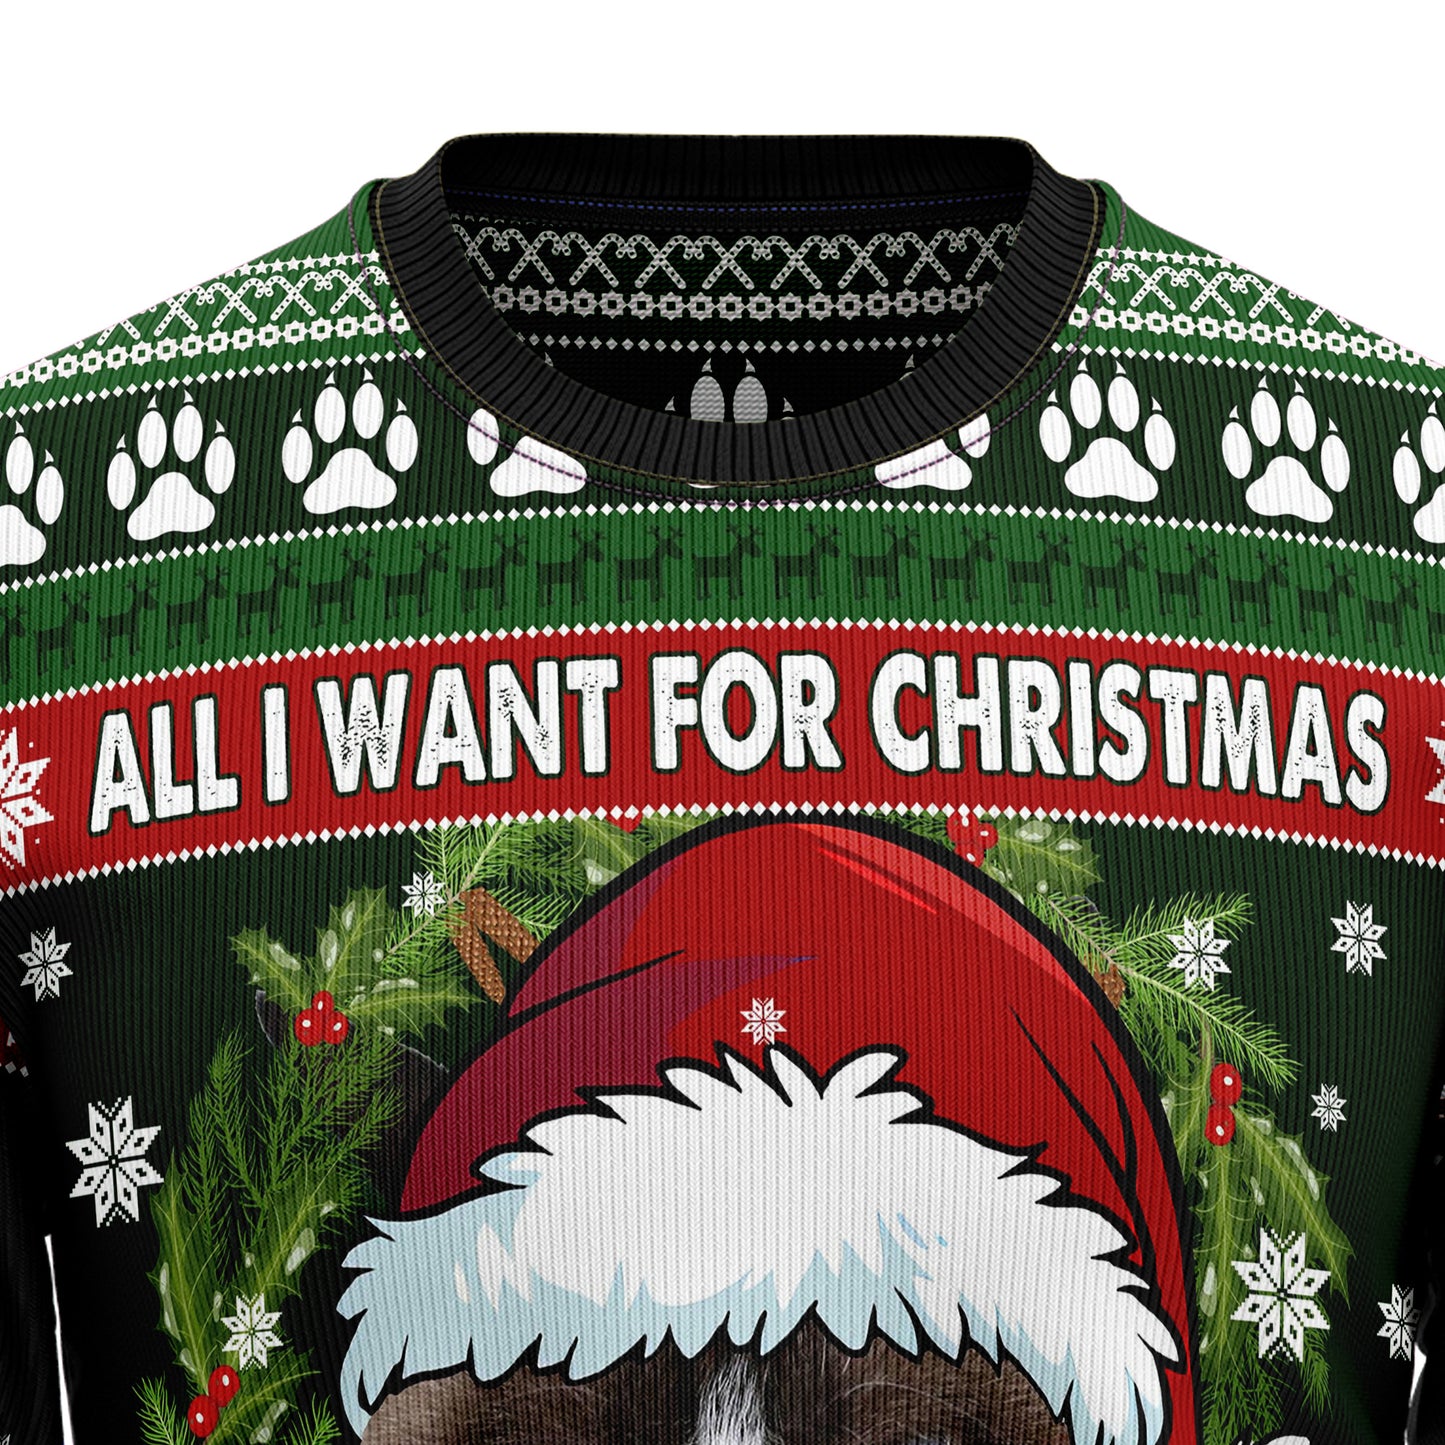 Grumpy Cat Punch You TY2010 Ugly Christmas Sweater